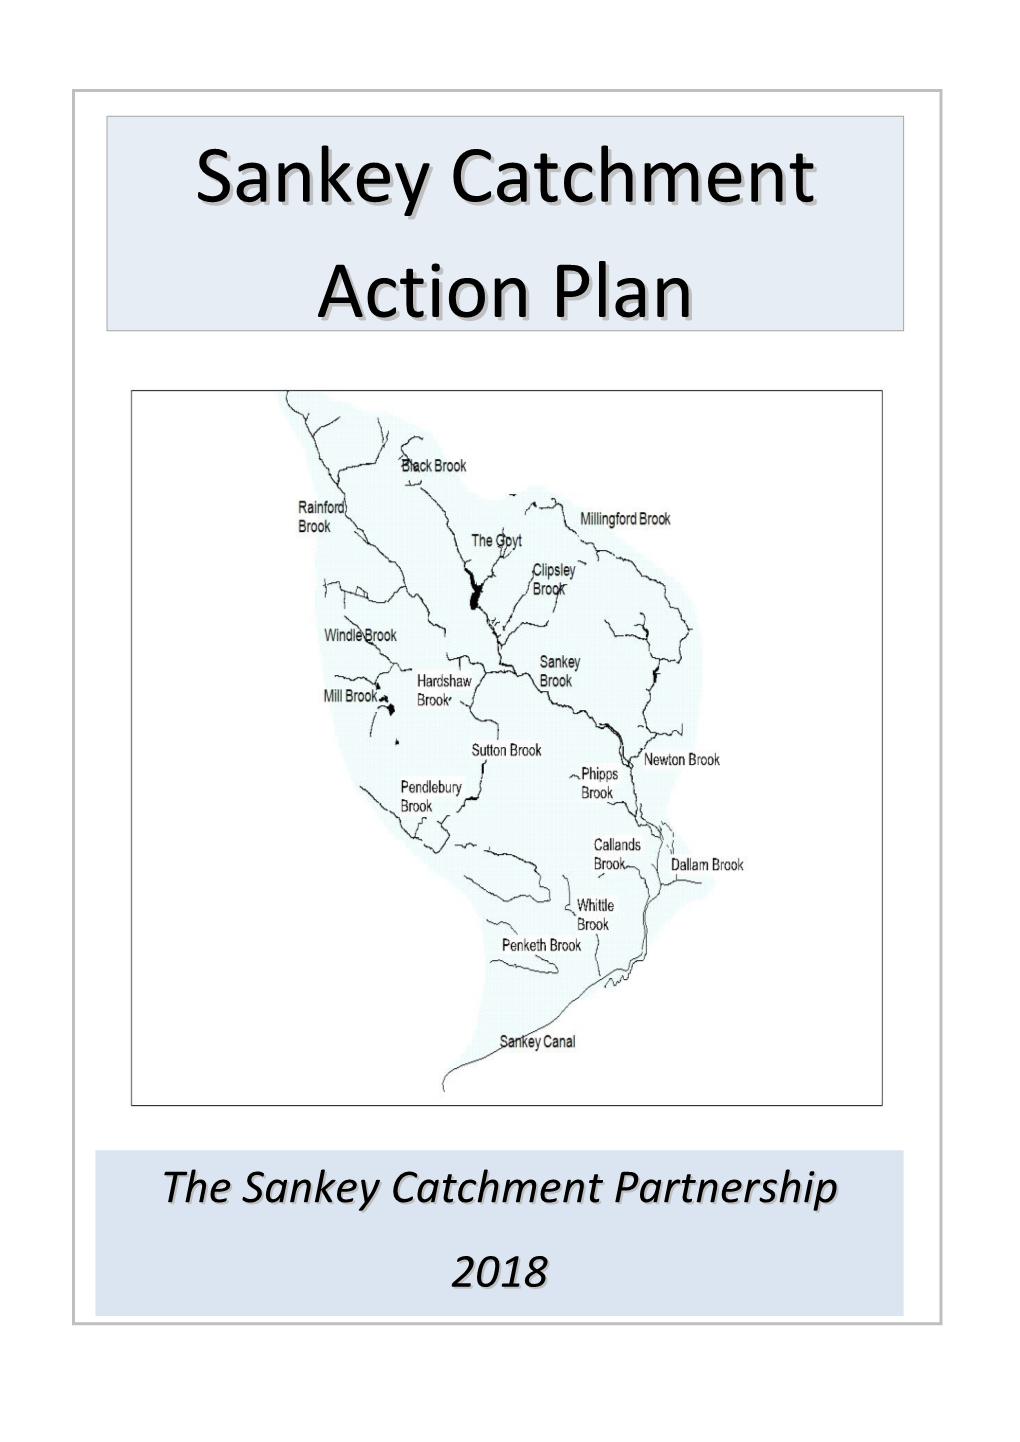 Sankey Catchment Action Plan Provides a Framework for Long-Term Integrated Water Management Across the Whole Sankey Catchment